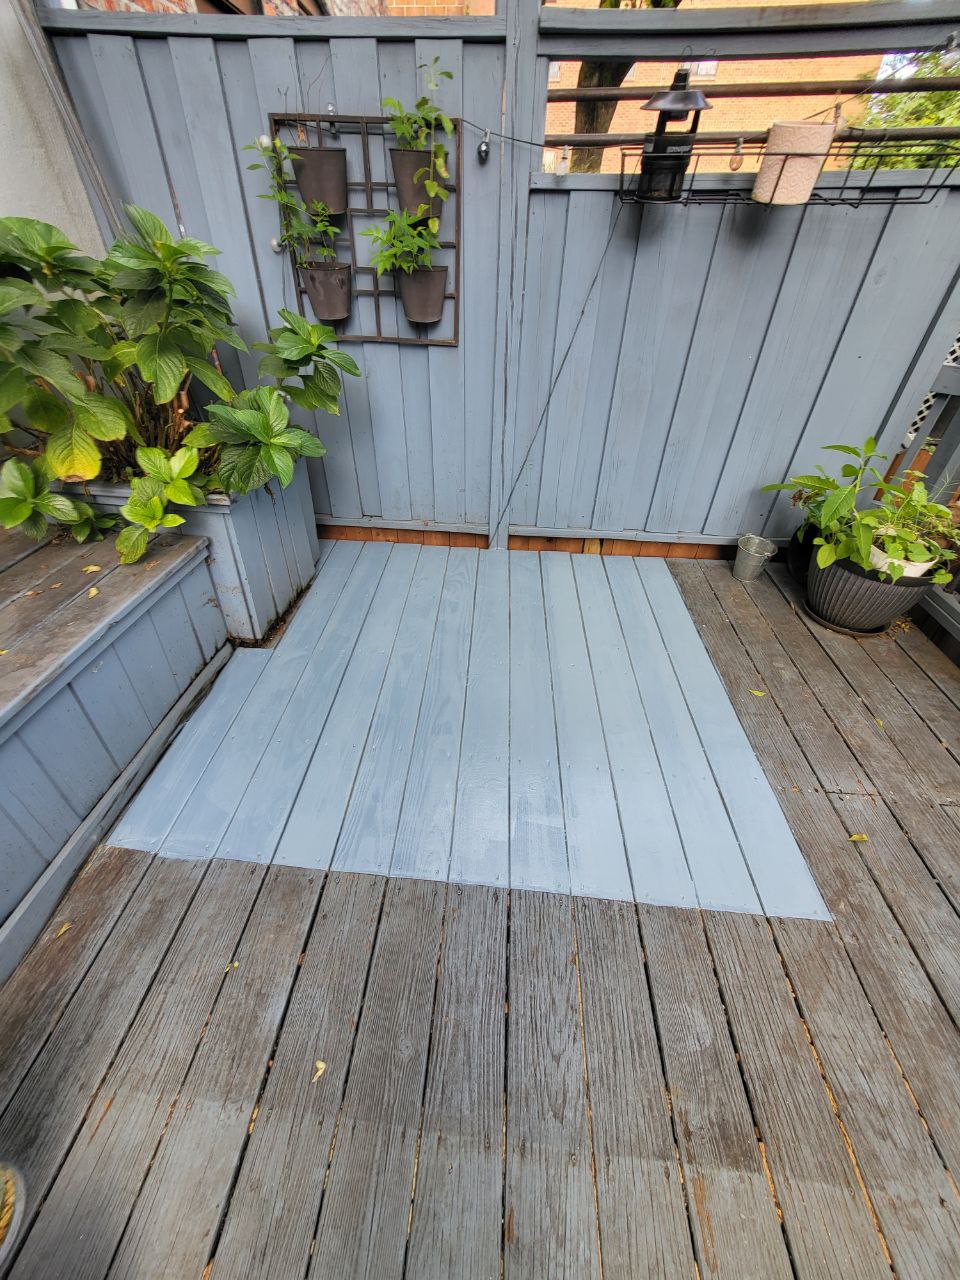 How To Replace Wood Deck Boards: A Guide by Quick Sidekick